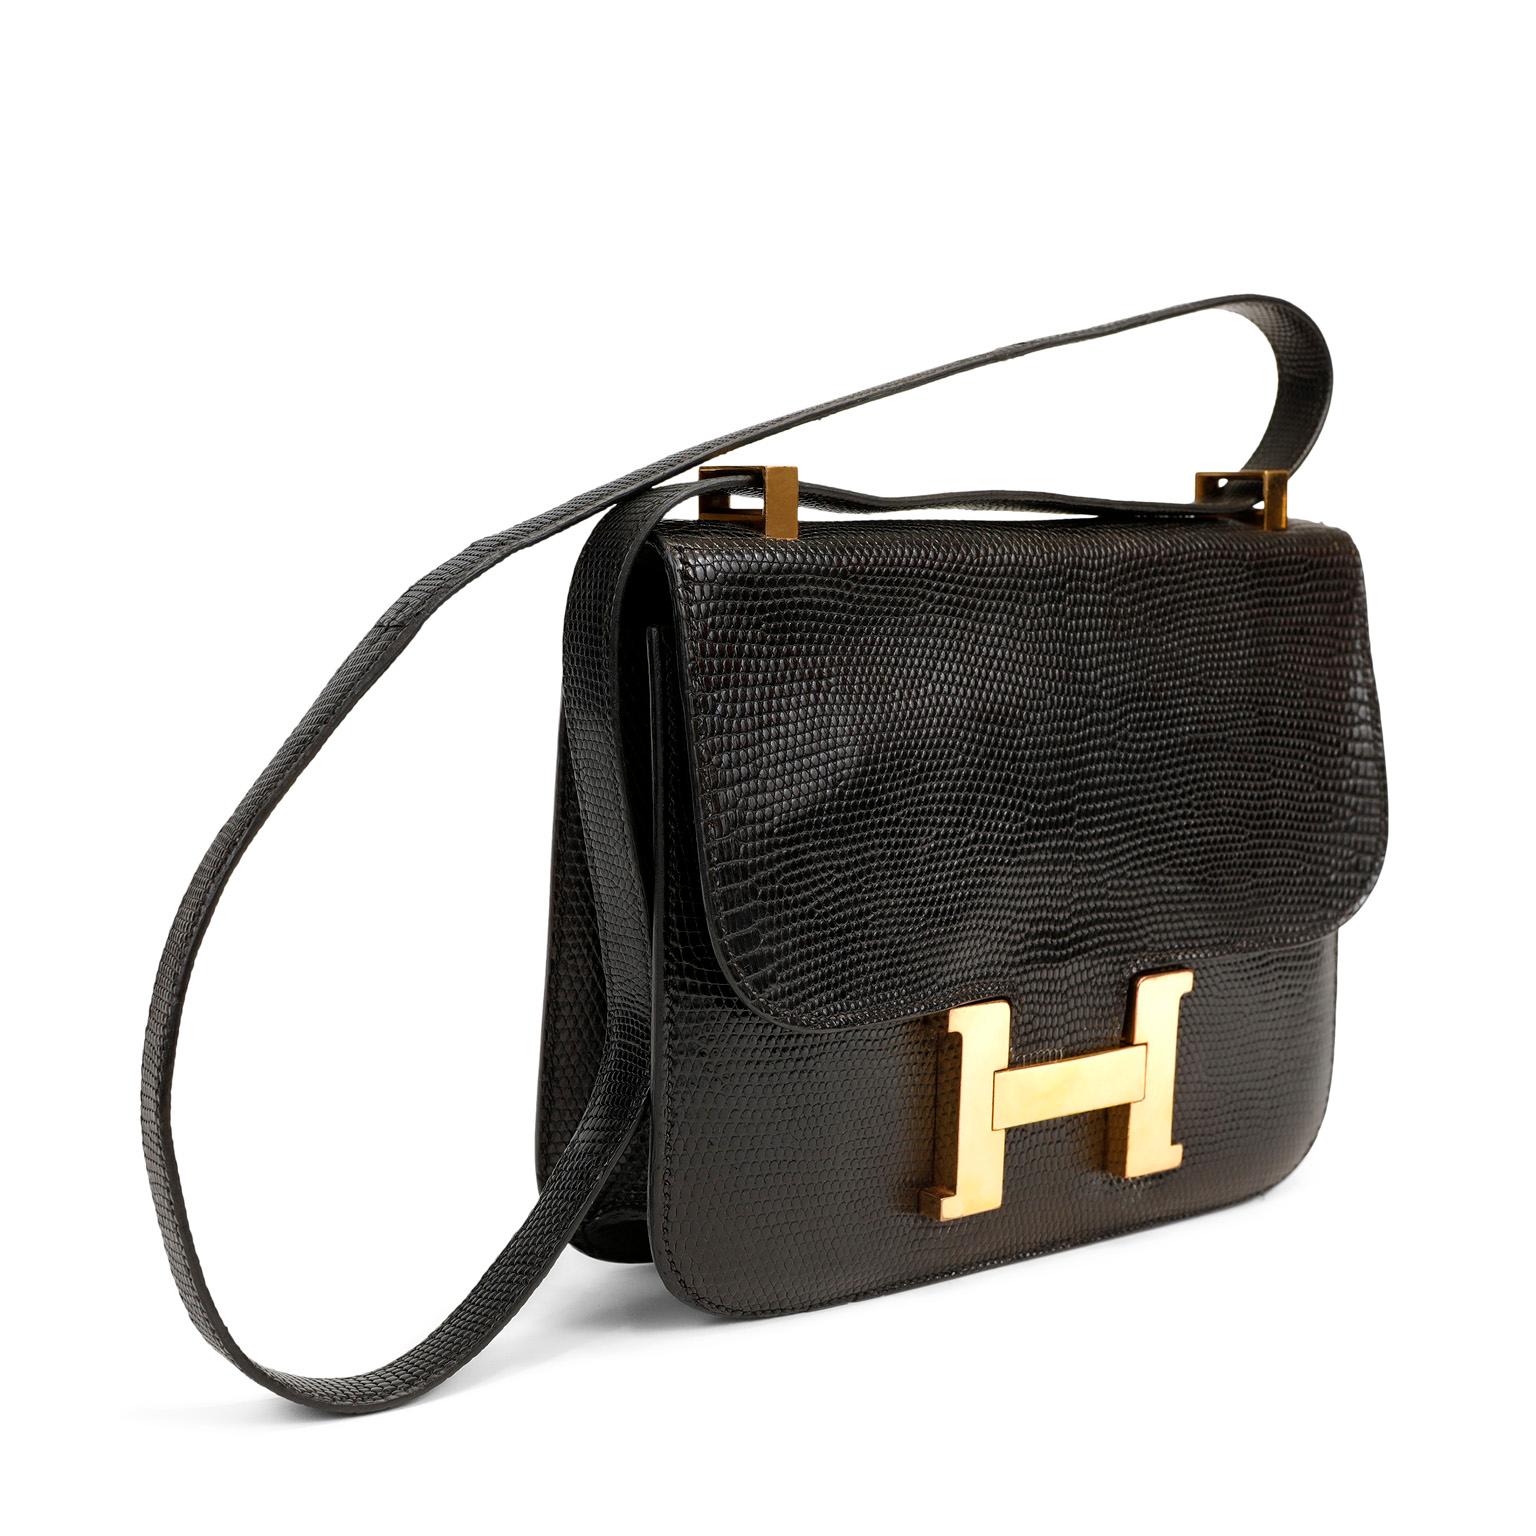 This authentic Hermès Black Lizard Constance is in beautiful vintage condition with mild signs of prior ownership.
The Constance has simple clean lines and combines classic with modern. The large gold tone signature Hermès architectural H spring